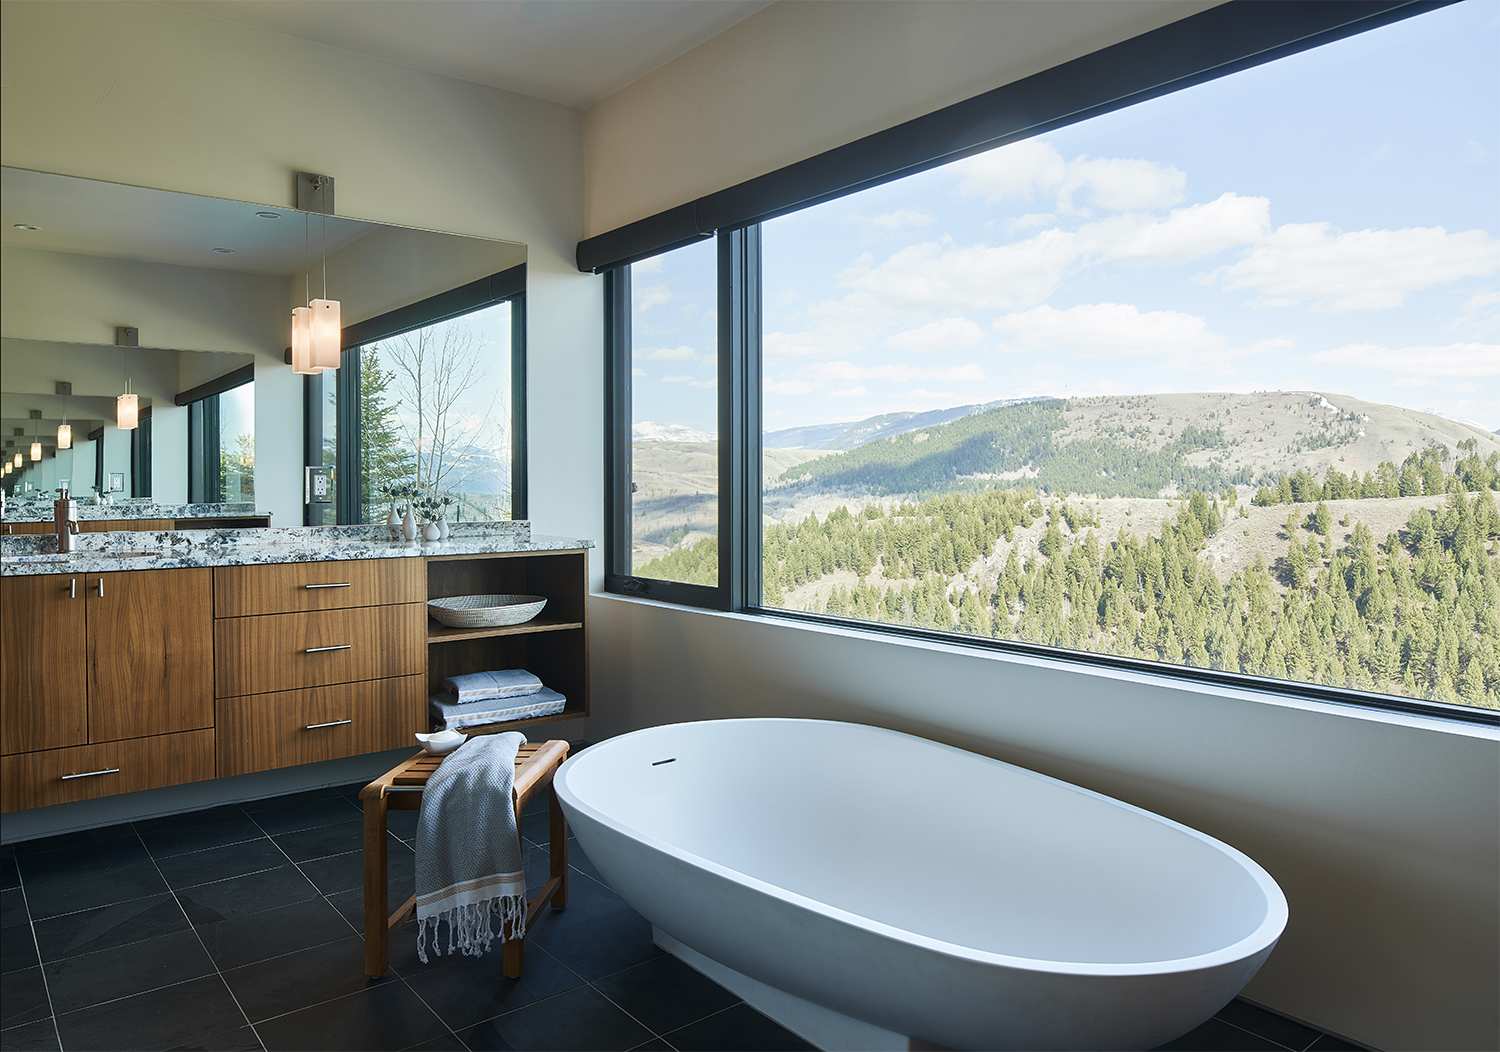 Interior view of the main bathroom at Gros Ventre West, a custom home designed and built by Farmer Payne Architects.